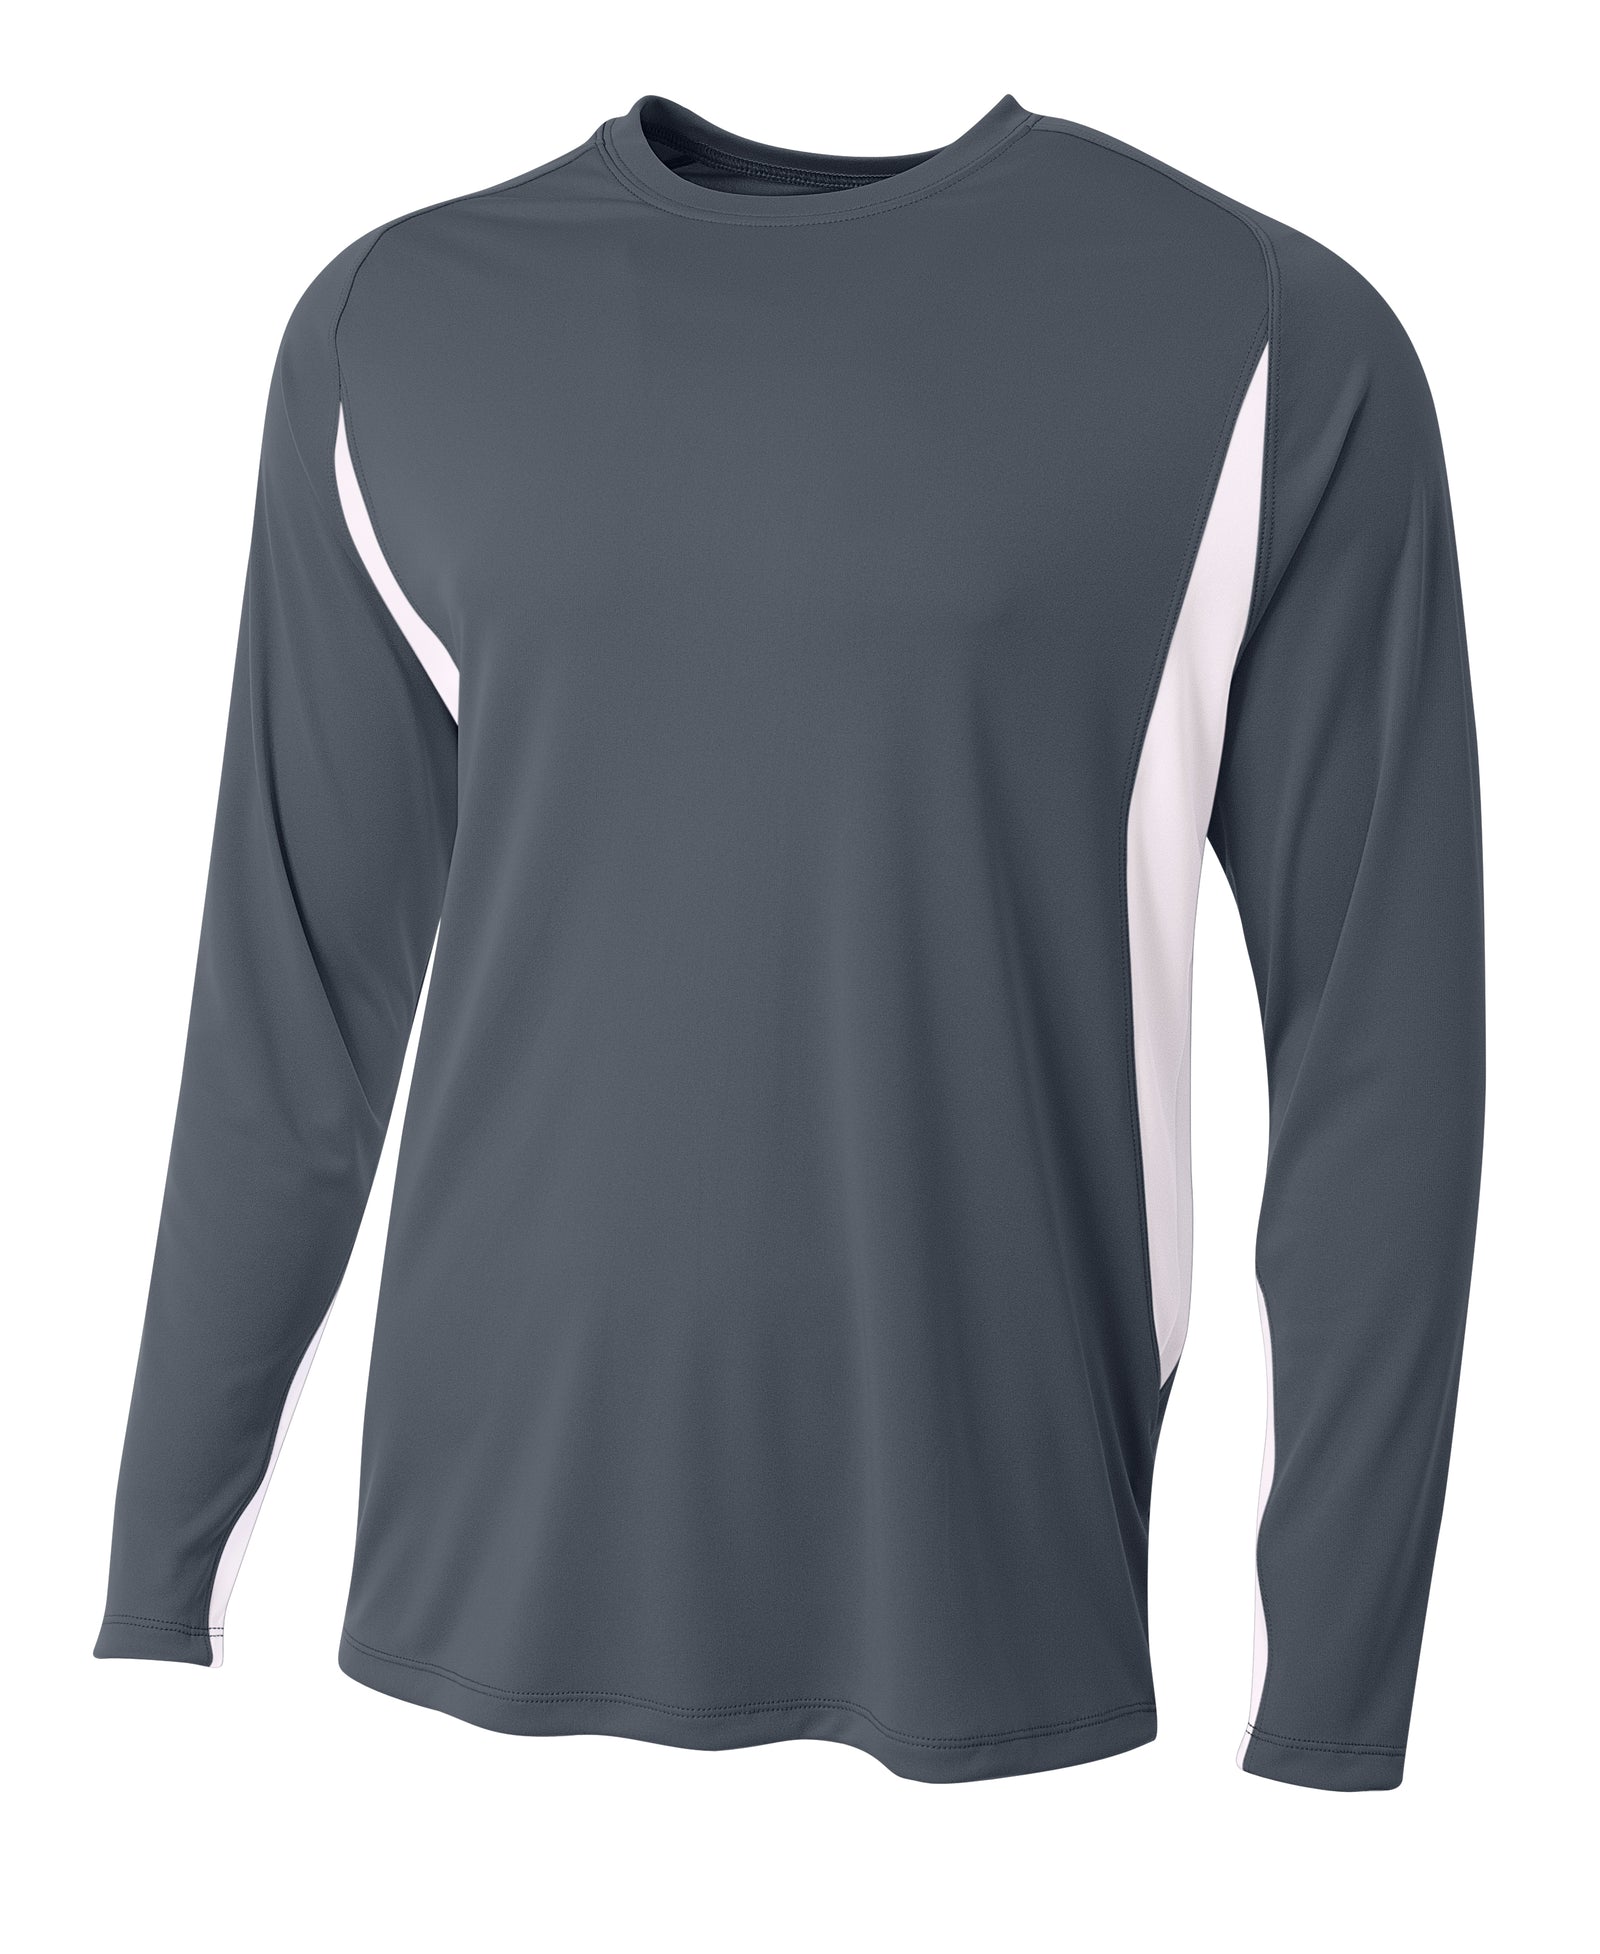 Graphite/white A4 A4 Long Sleeve Color Block Tee